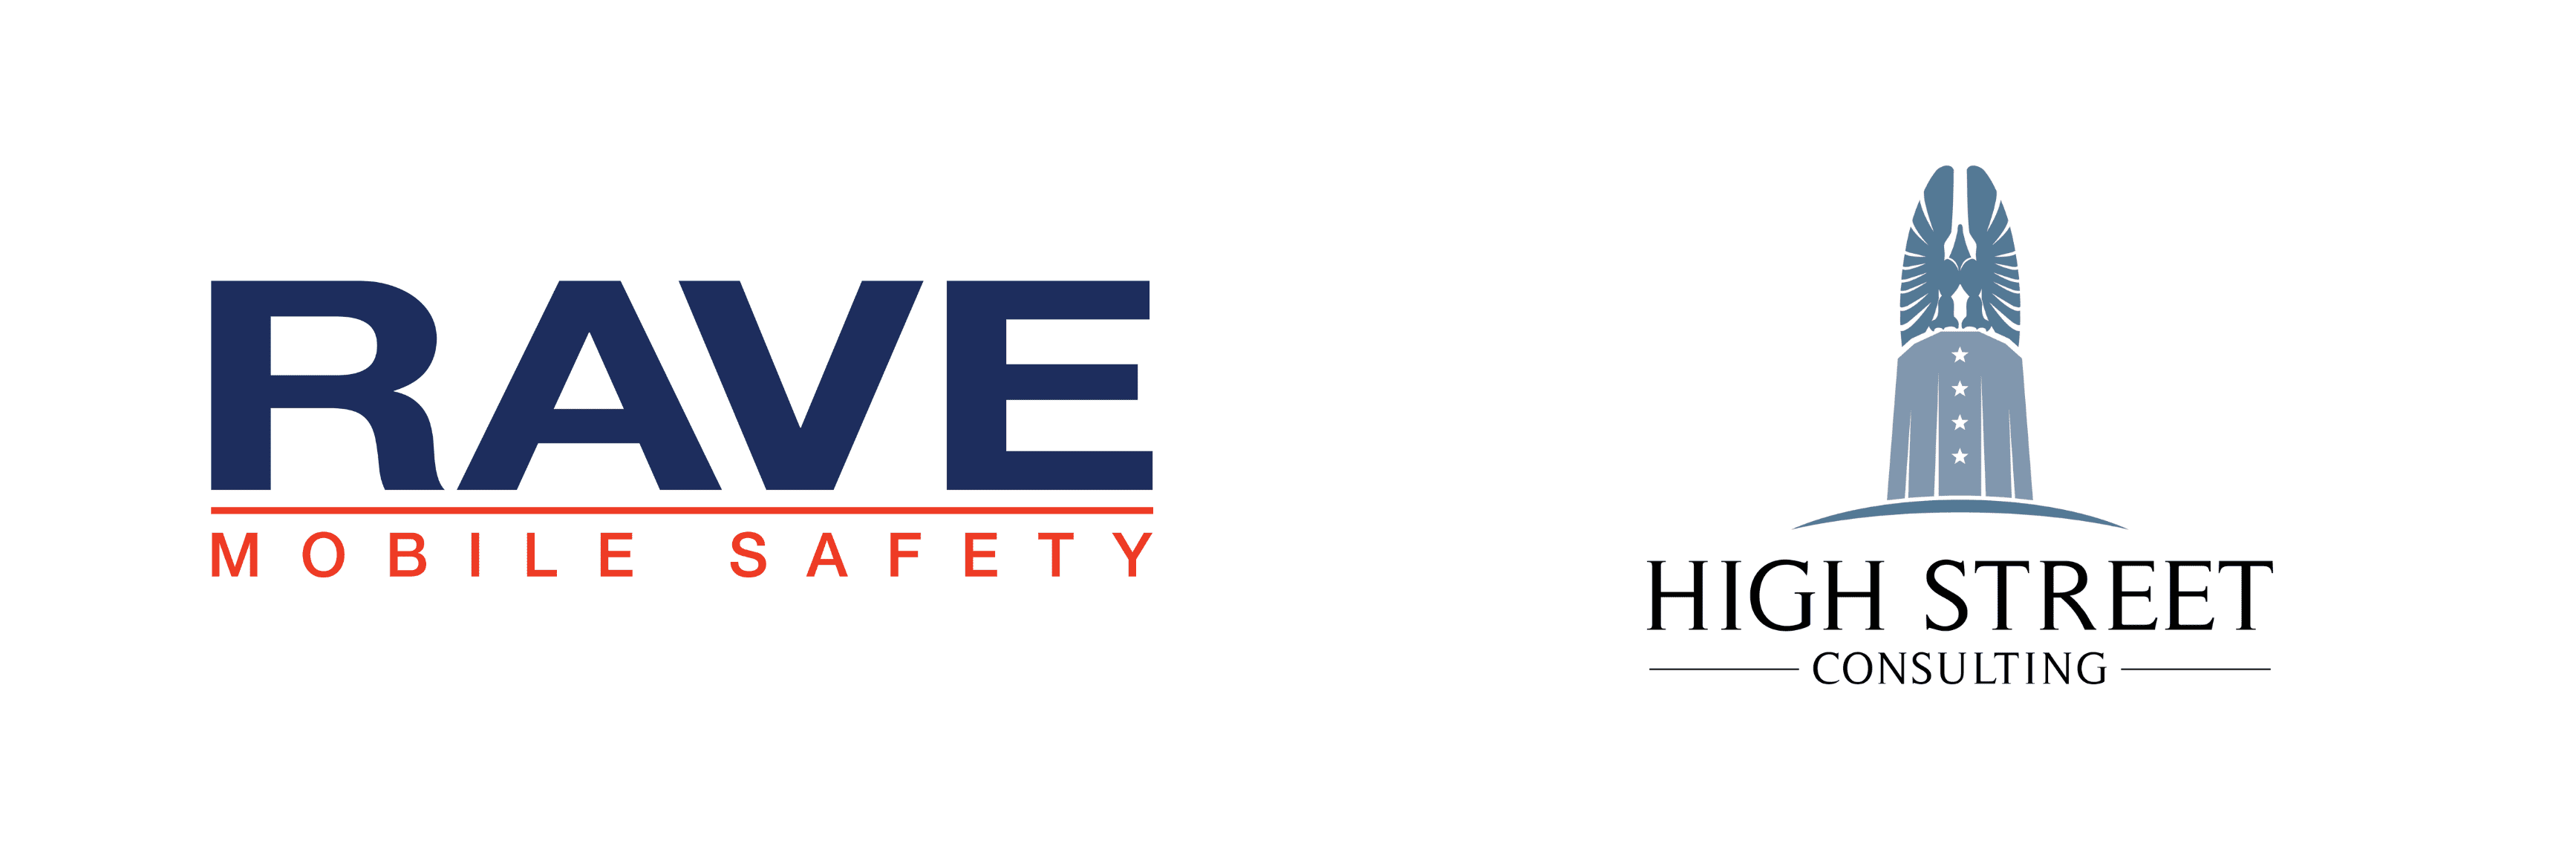 Rave Mobile Safety and High Street Consulting logos